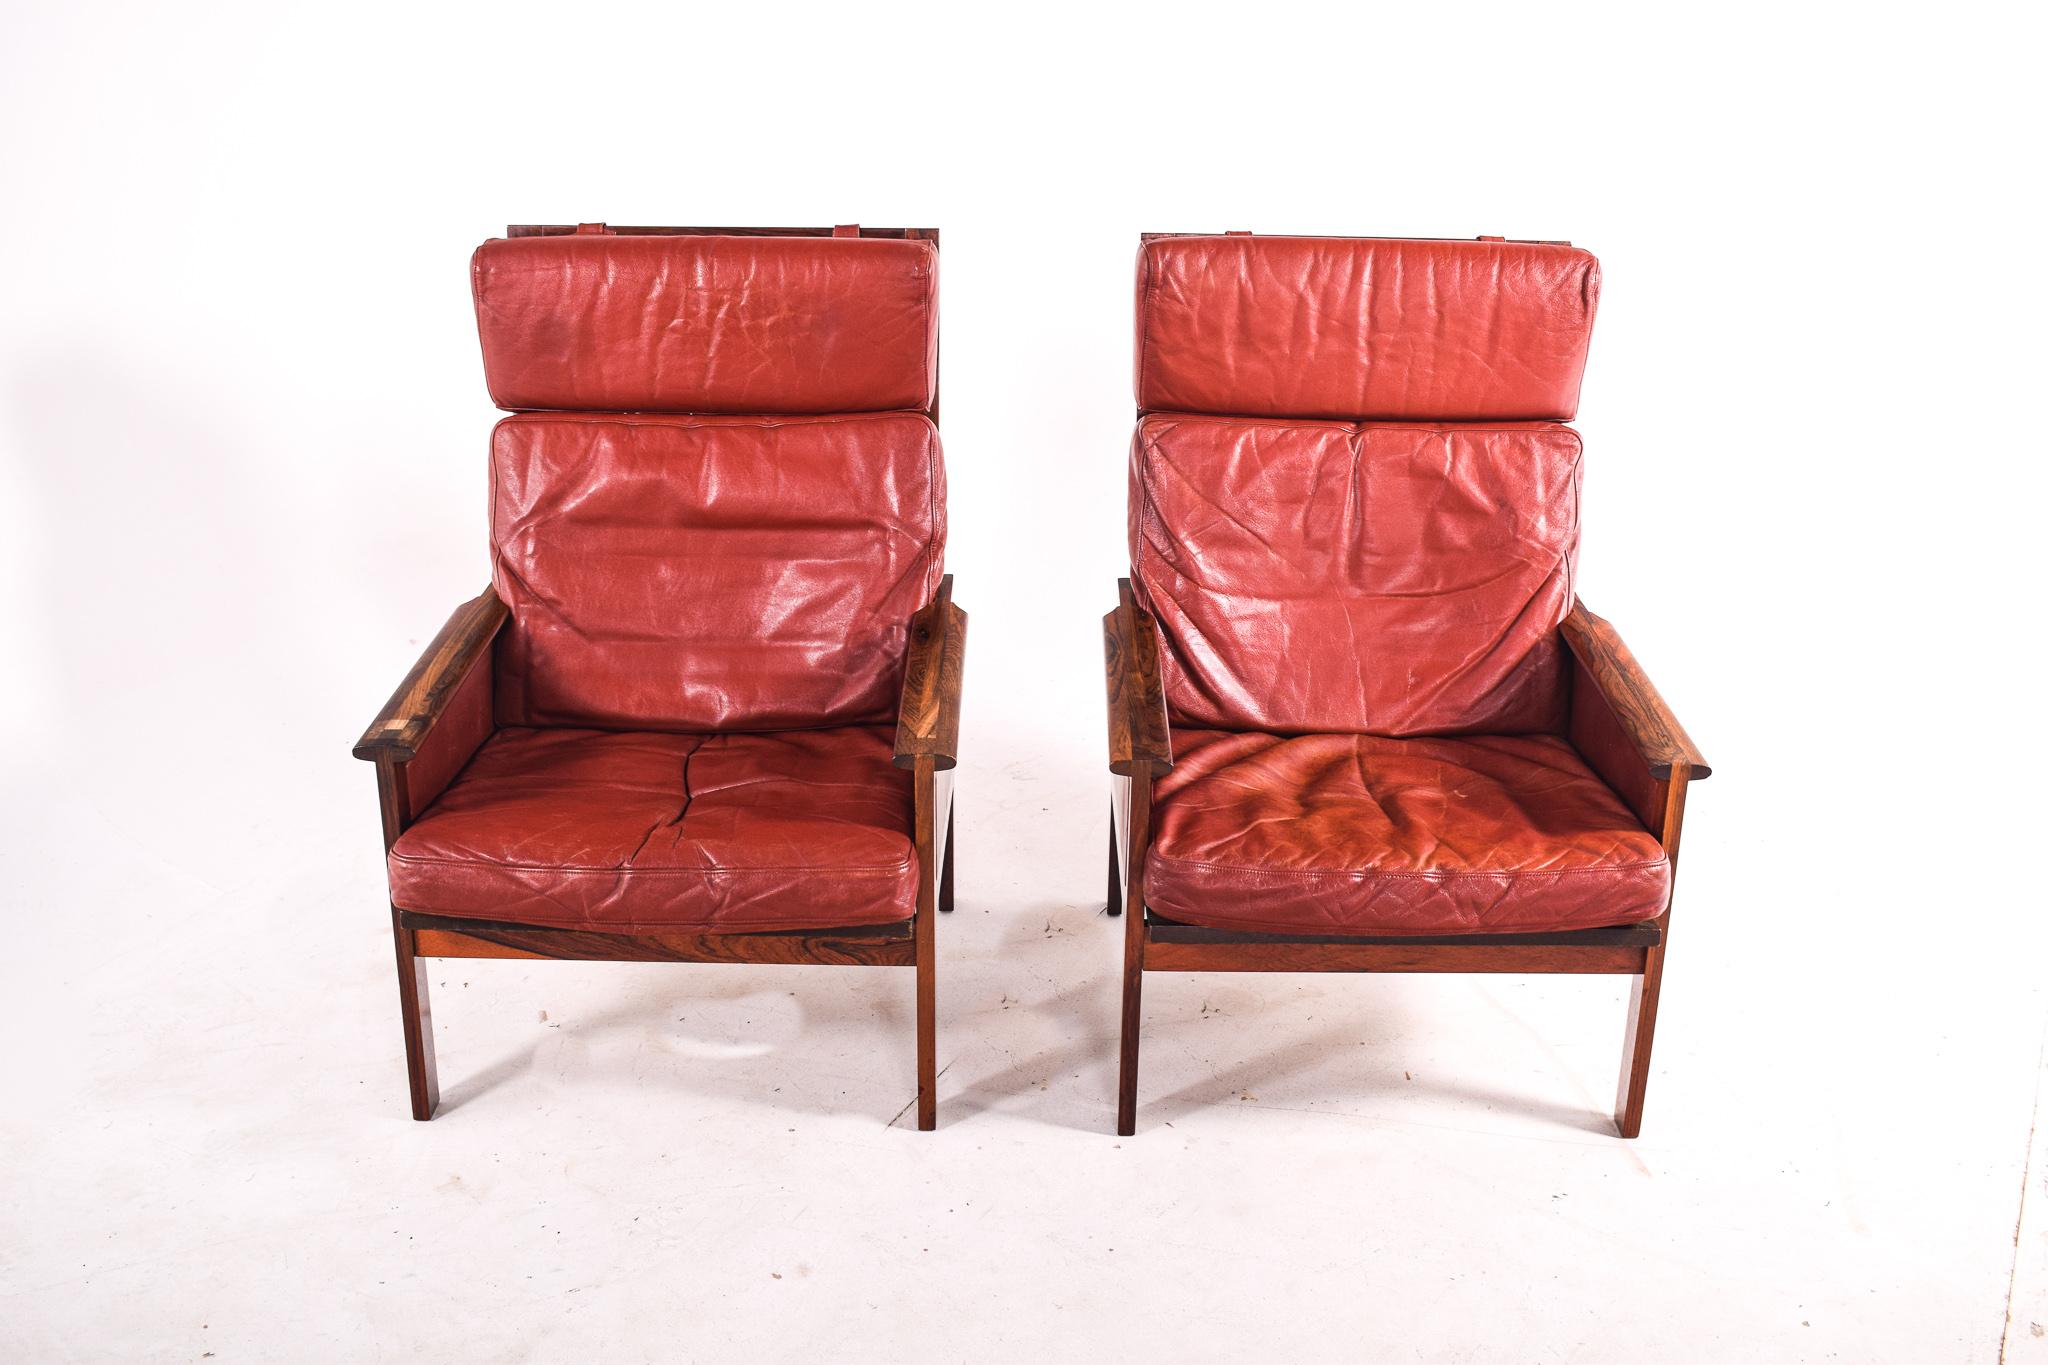 Pair of armchairs in rosewood with high back, from Denmark, 1960s. Designed by Illum Wikkelso for Niels Eilersen. Very conformable and in excellent condition. Upholstery in leather. A high back version of the Capella chair. Features a compact